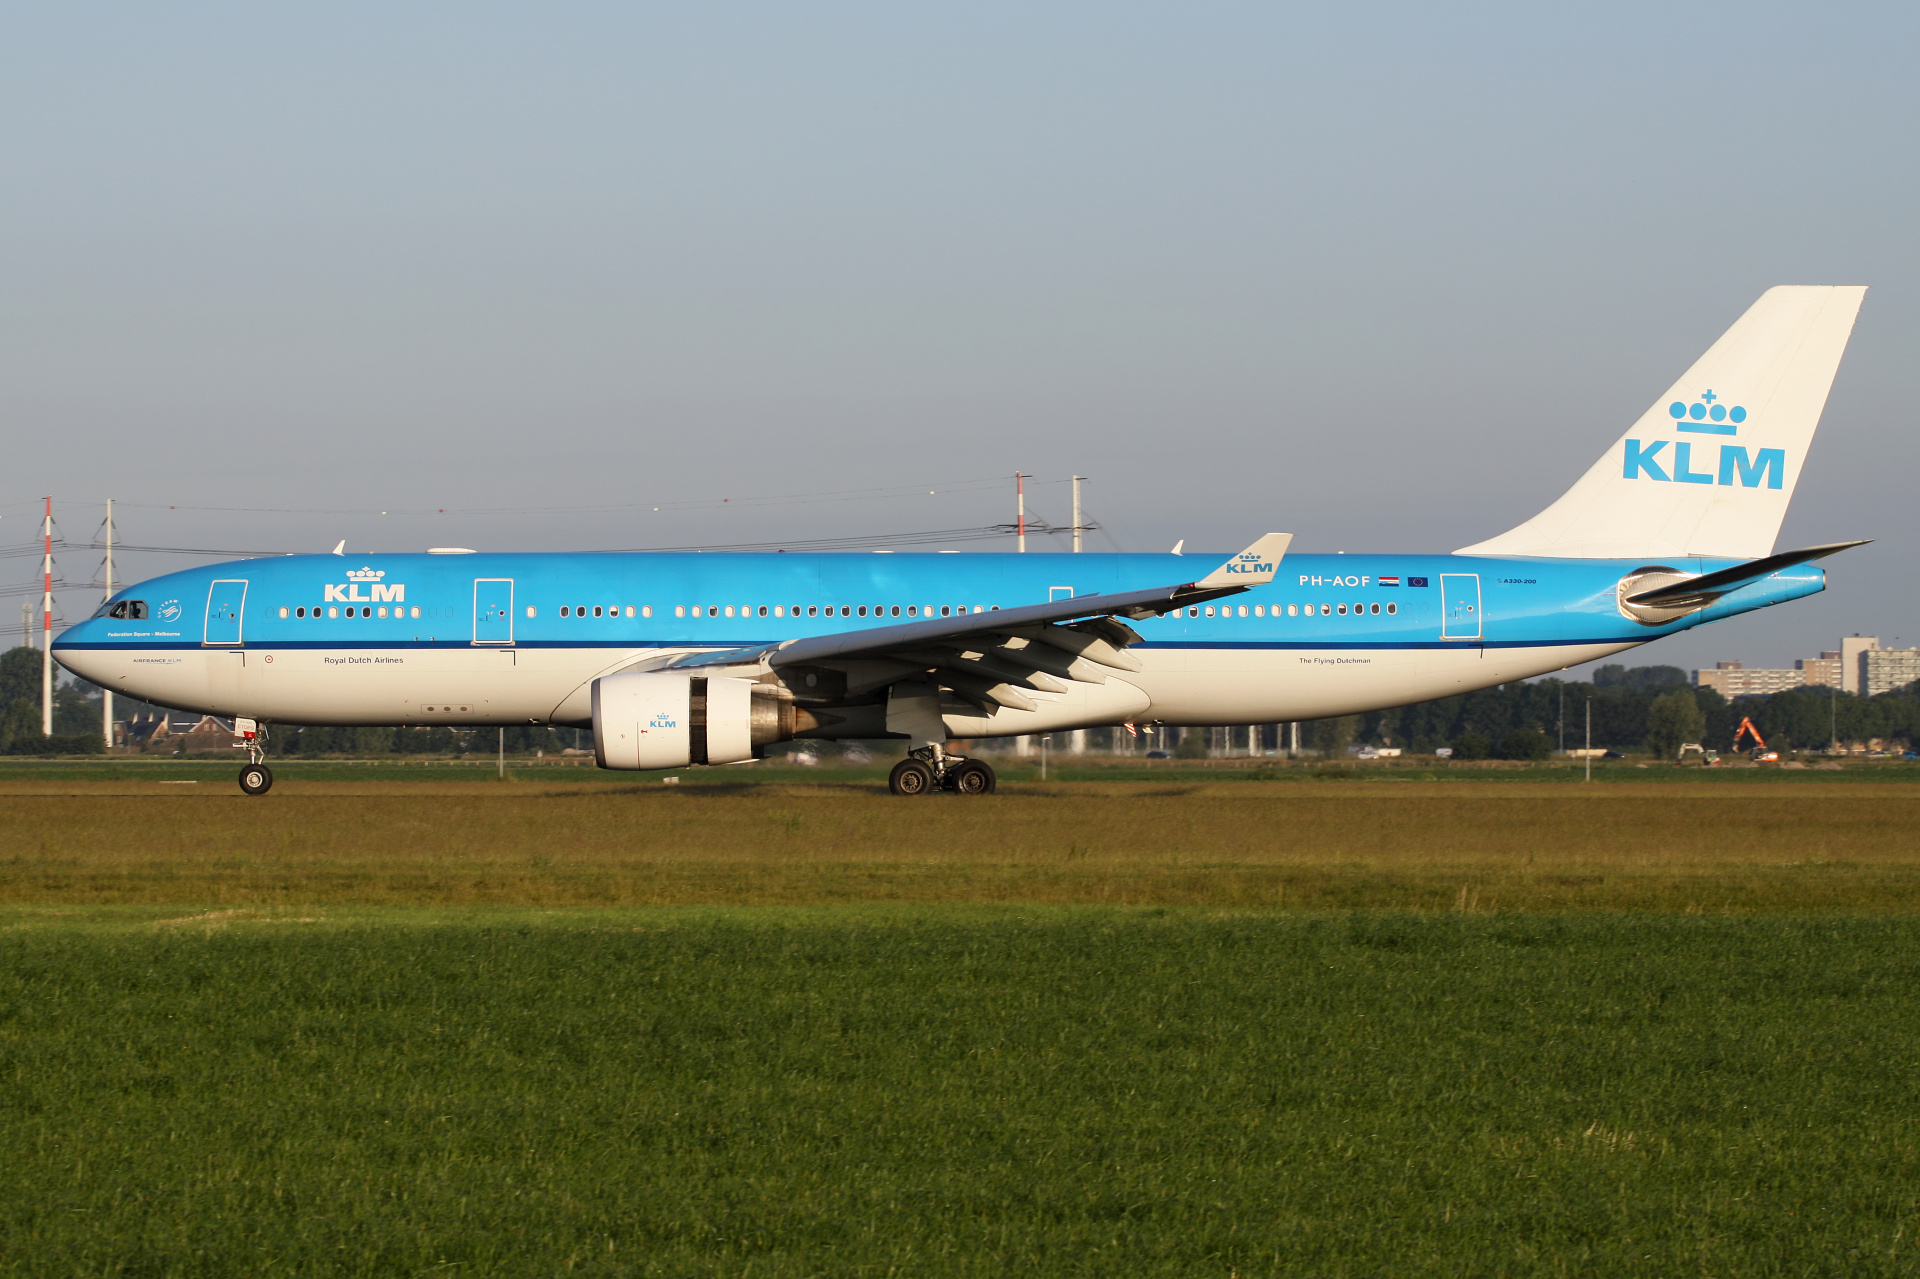 PH-AOF (Samoloty » Spotting na Schiphol » Airbus A330-200 » KLM Royal Dutch Airlines)